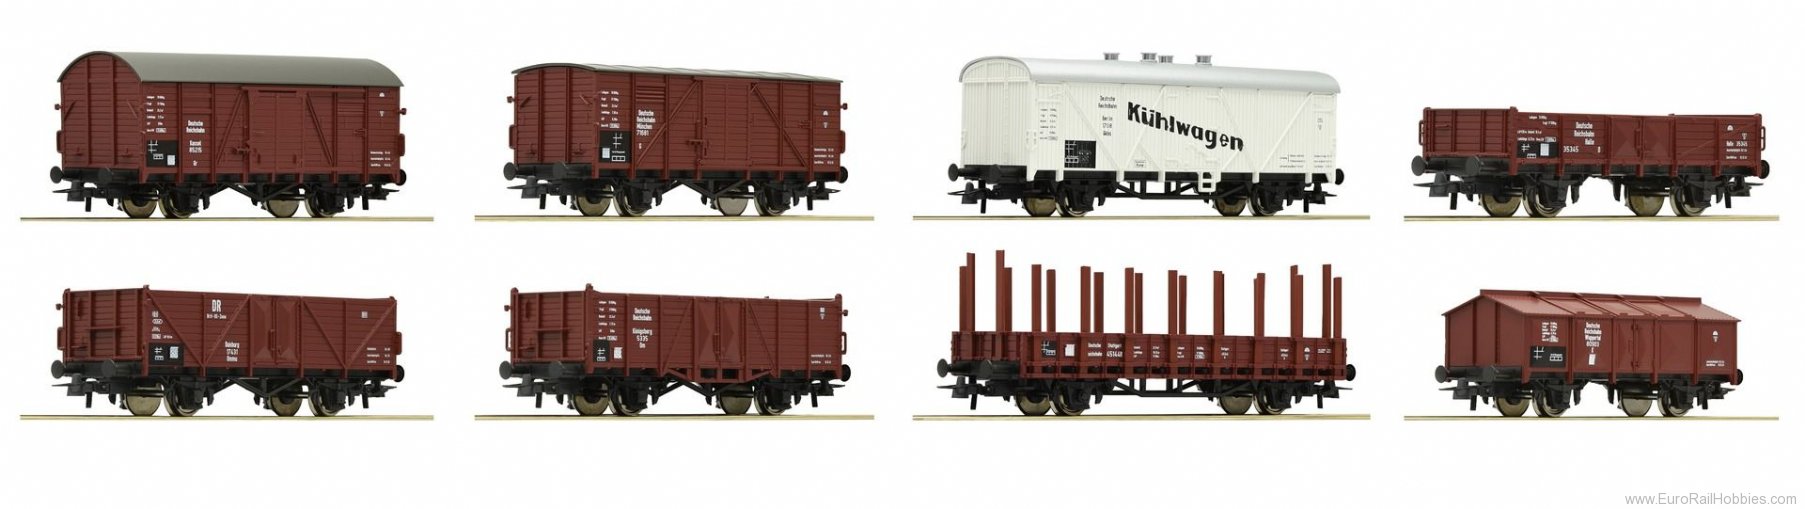 Roco 44003 8-piece set of freight cars, DRG